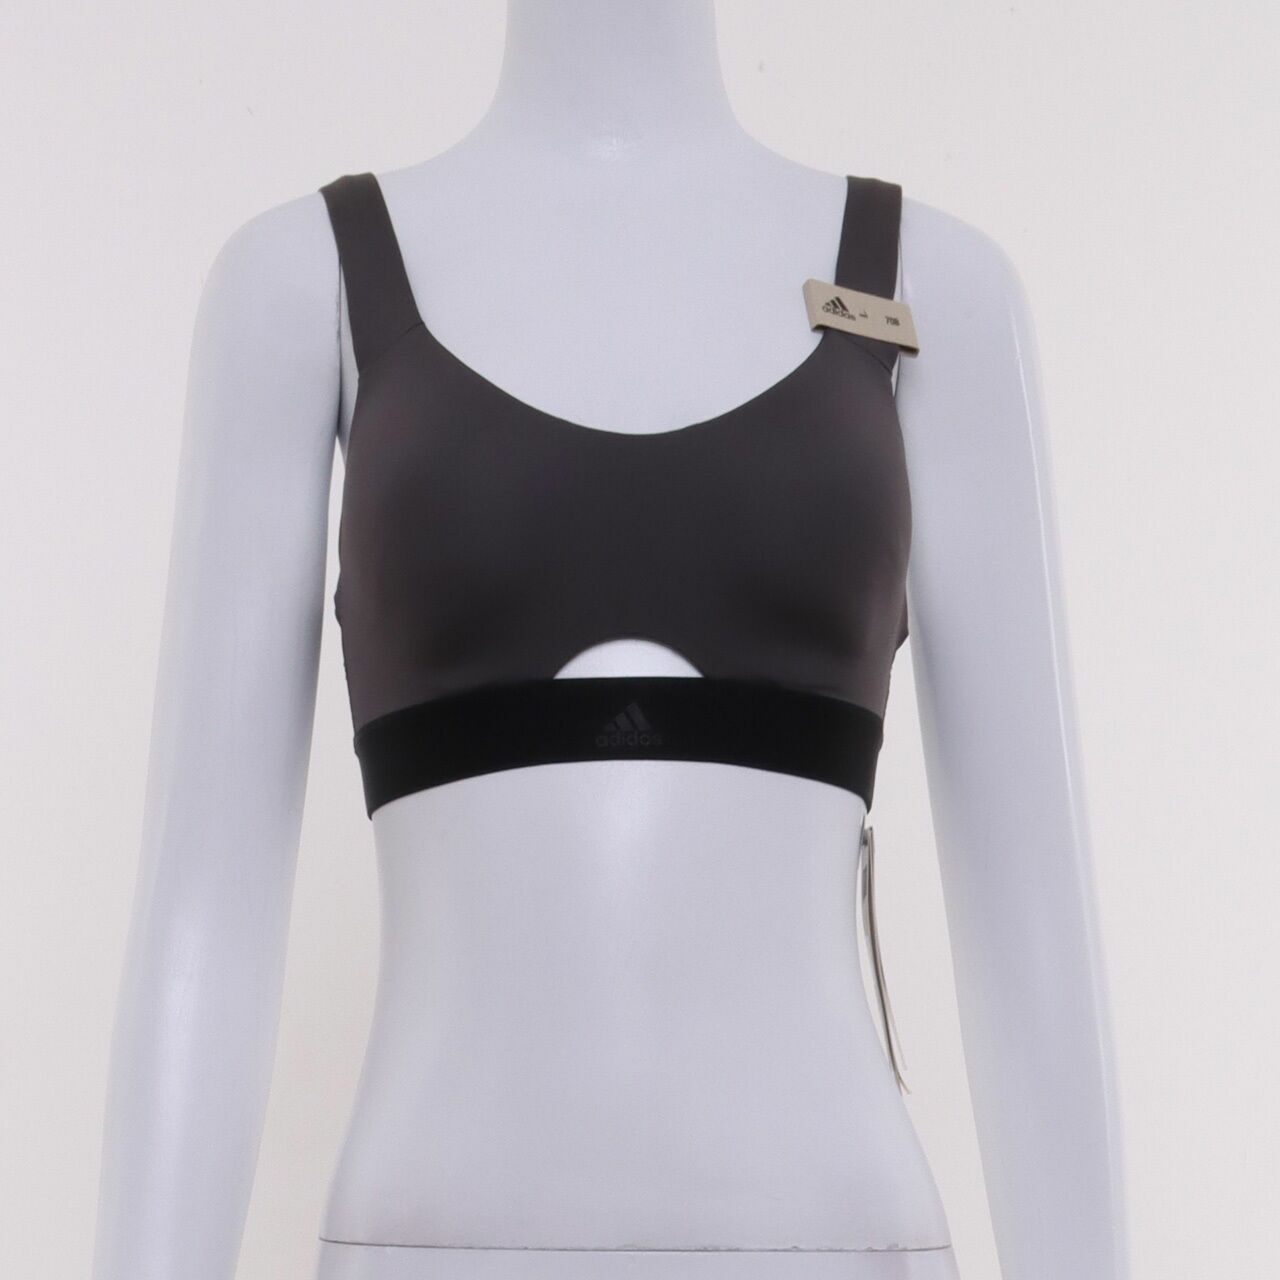 Adidas Stronger For It Soft Bra